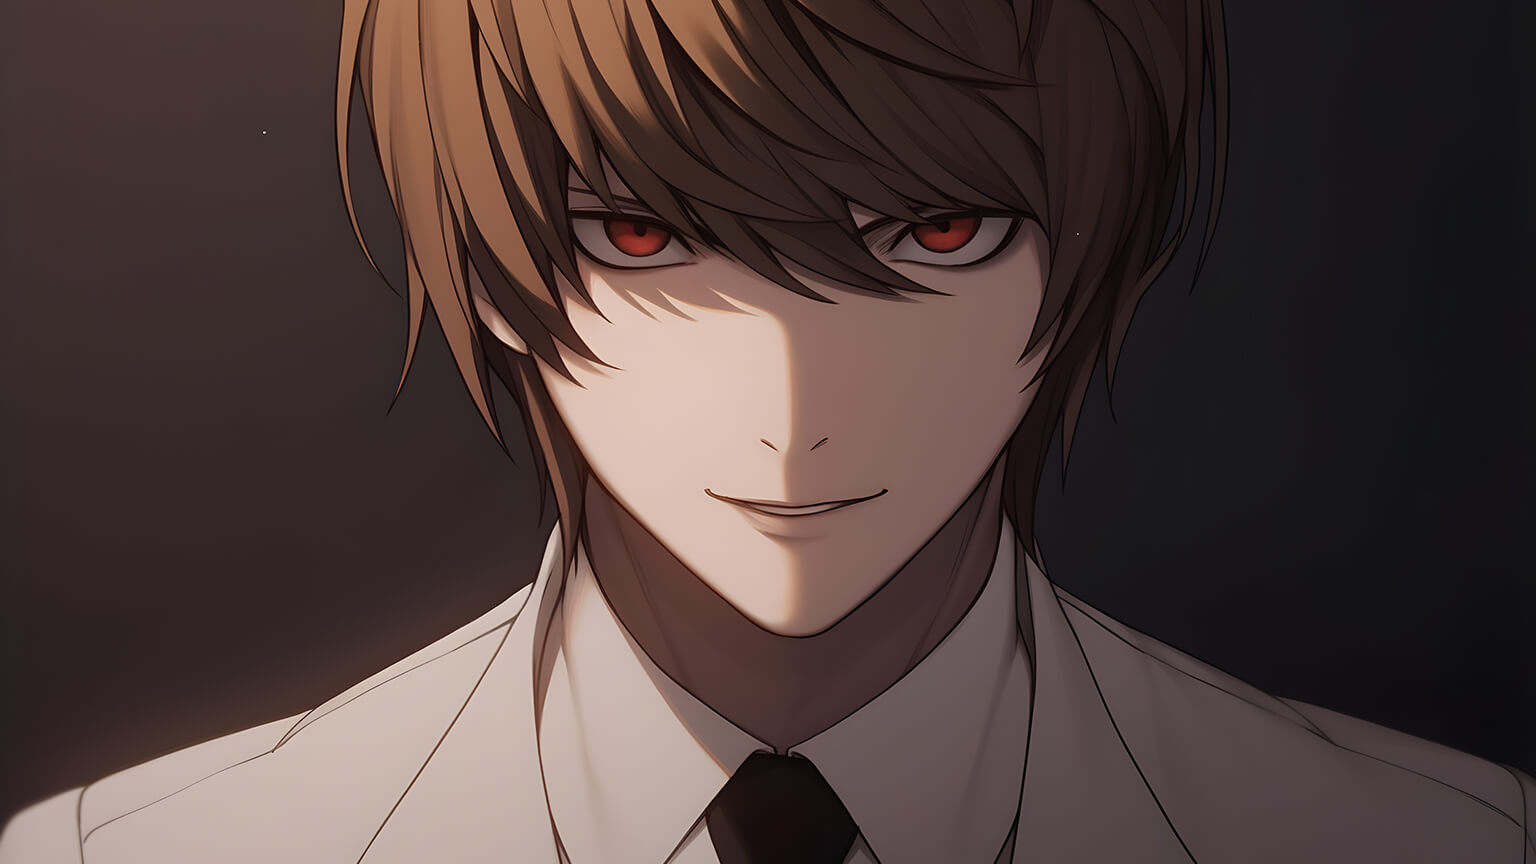 Light yagami  Death note kira, Death note light, Death note